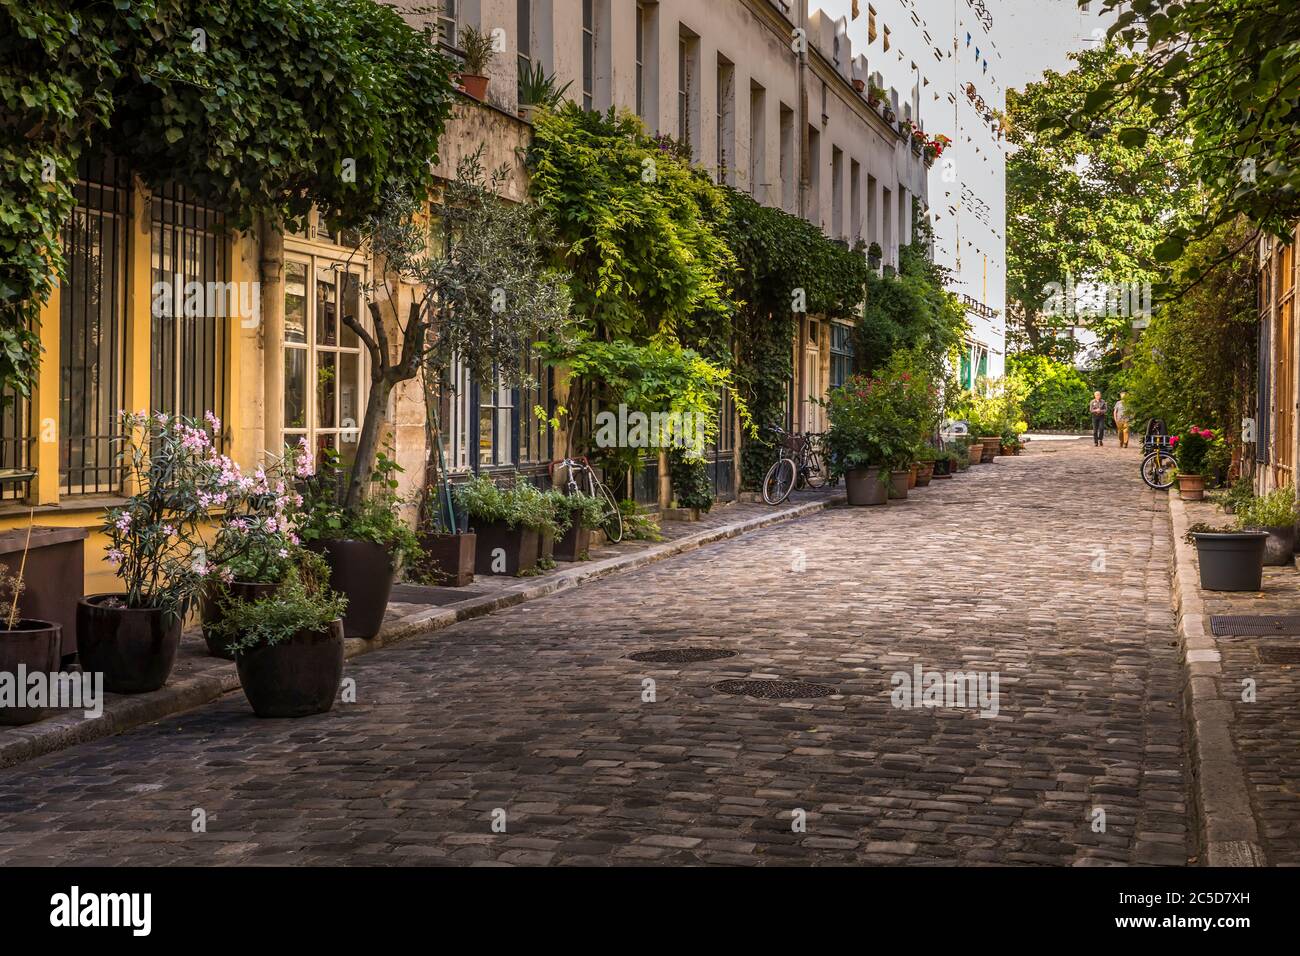 Paris, France - June 24, 2020: Passage Lhomme with its vegetation and its old workshops in Paris 11th district Stock Photo